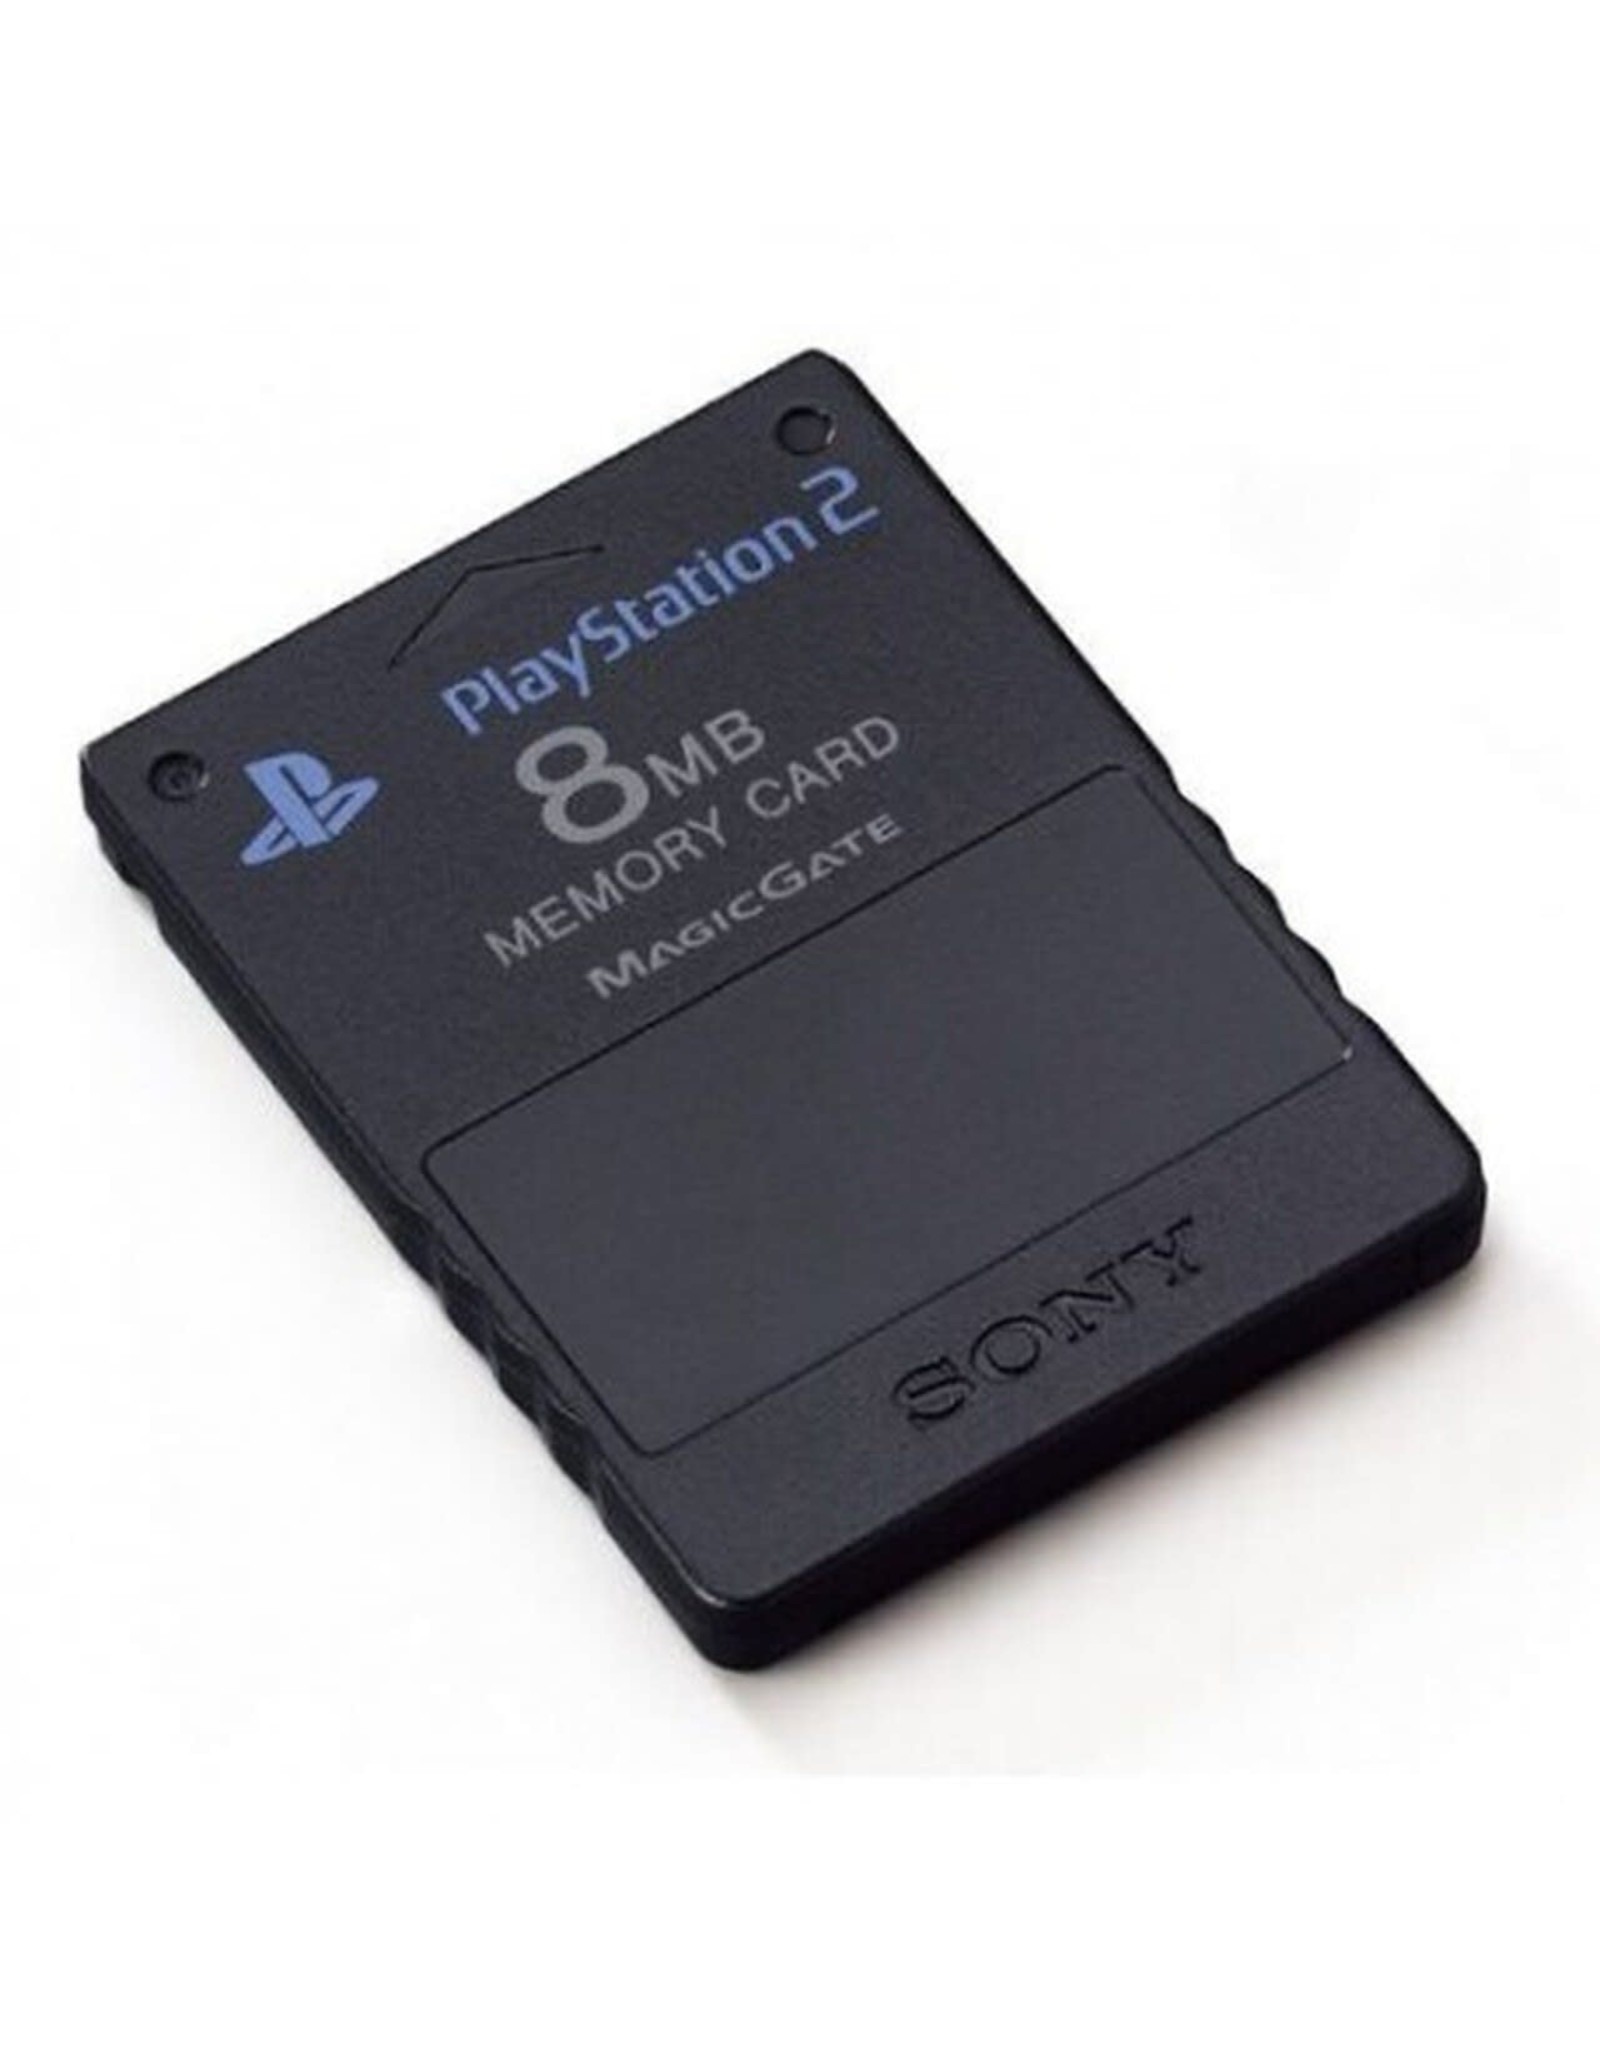 Playstation 2 Playstation 2 PS2 8MB Memory Card - OEM, Assorted Colours (Used)